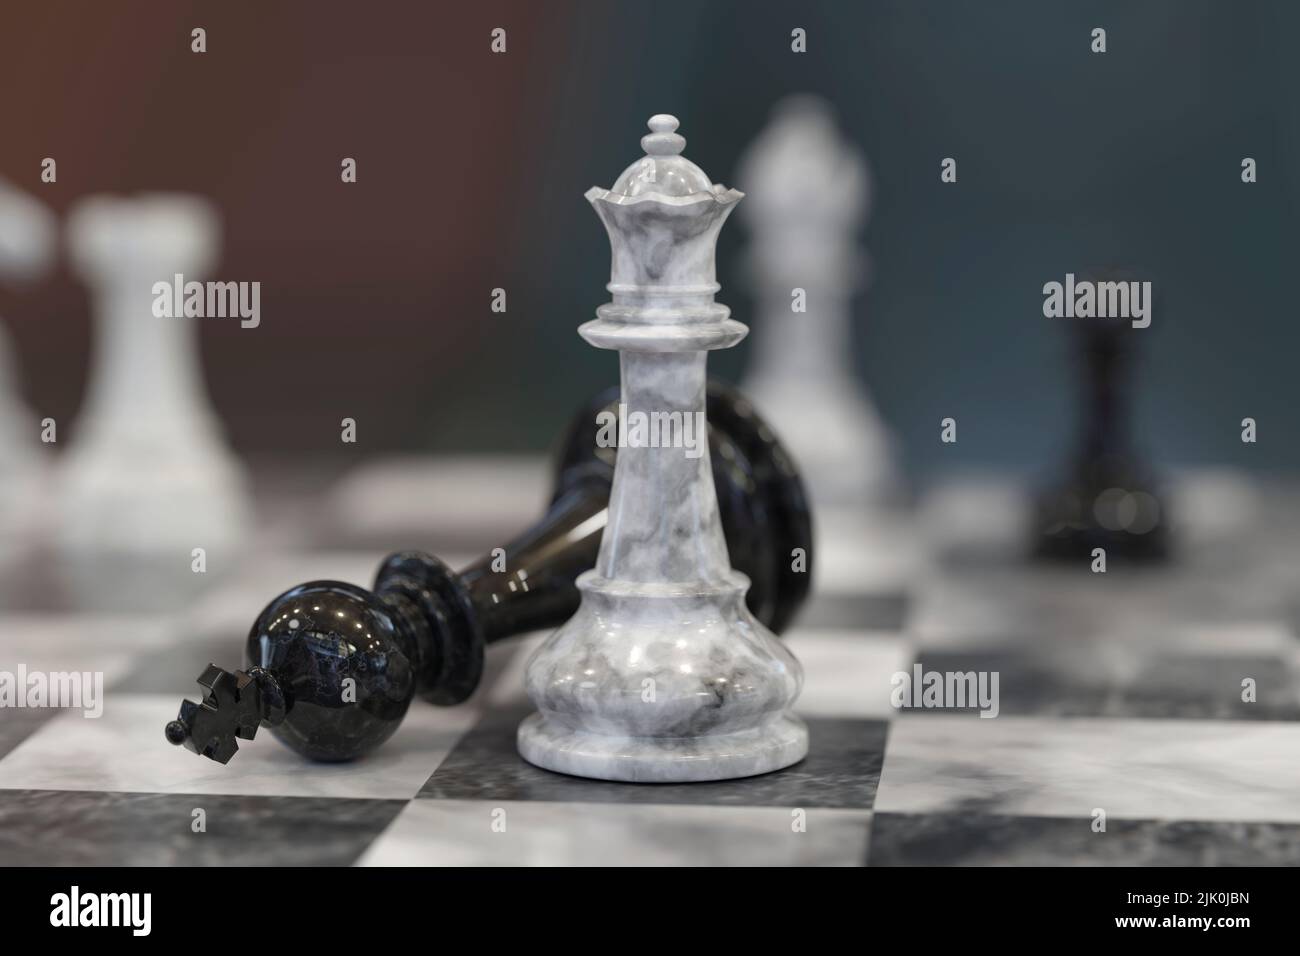 3d illustration of a game of chess showing checkmate Stock Photo